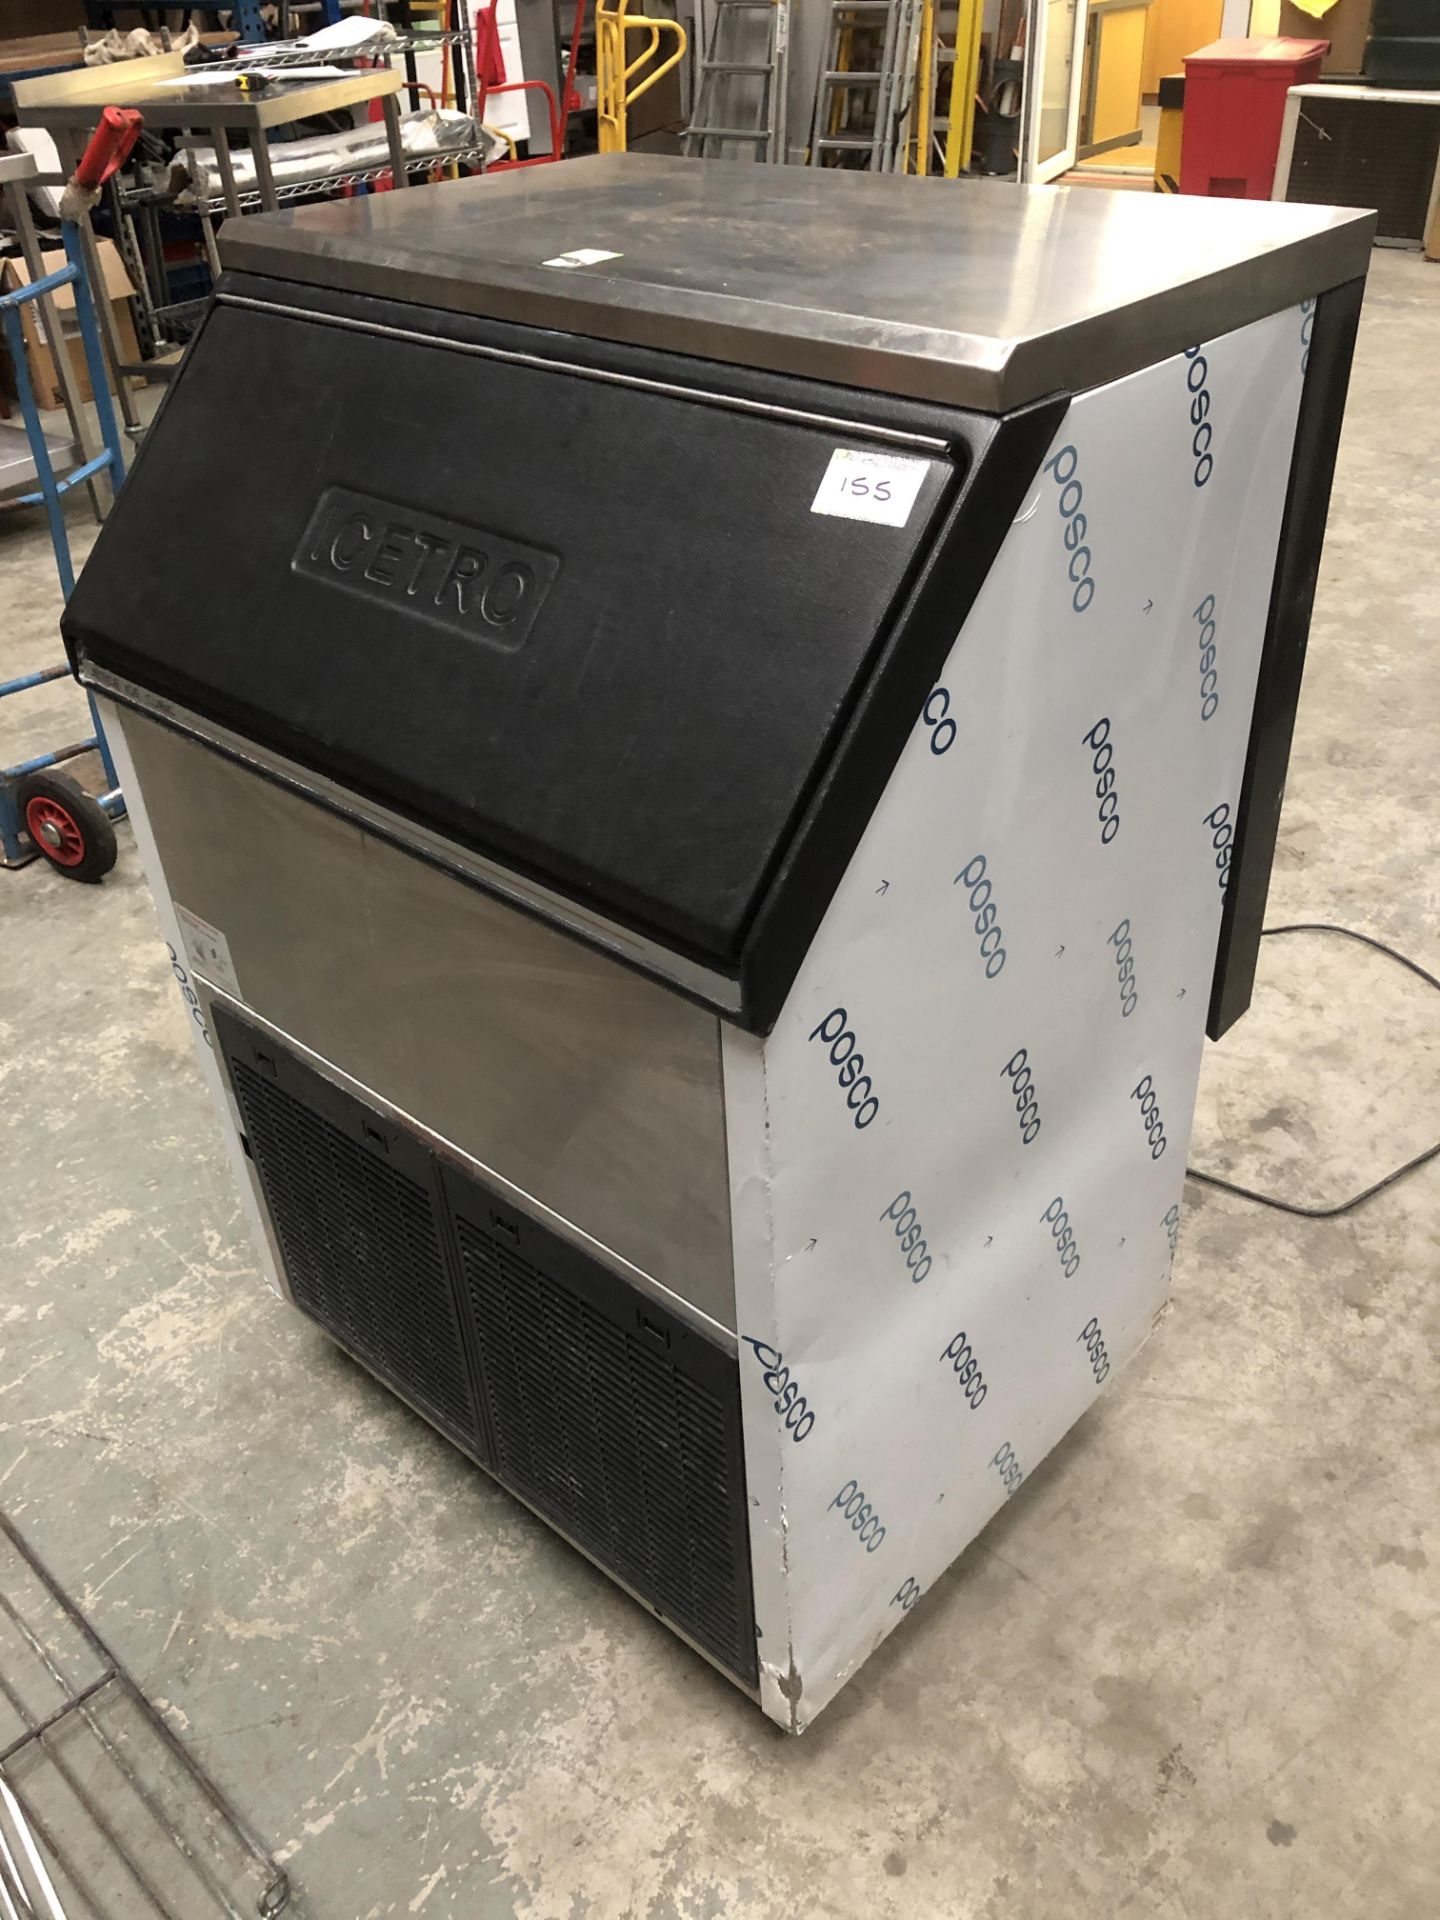 Icetro Large Ice Maker with Large Bin - Image 3 of 4